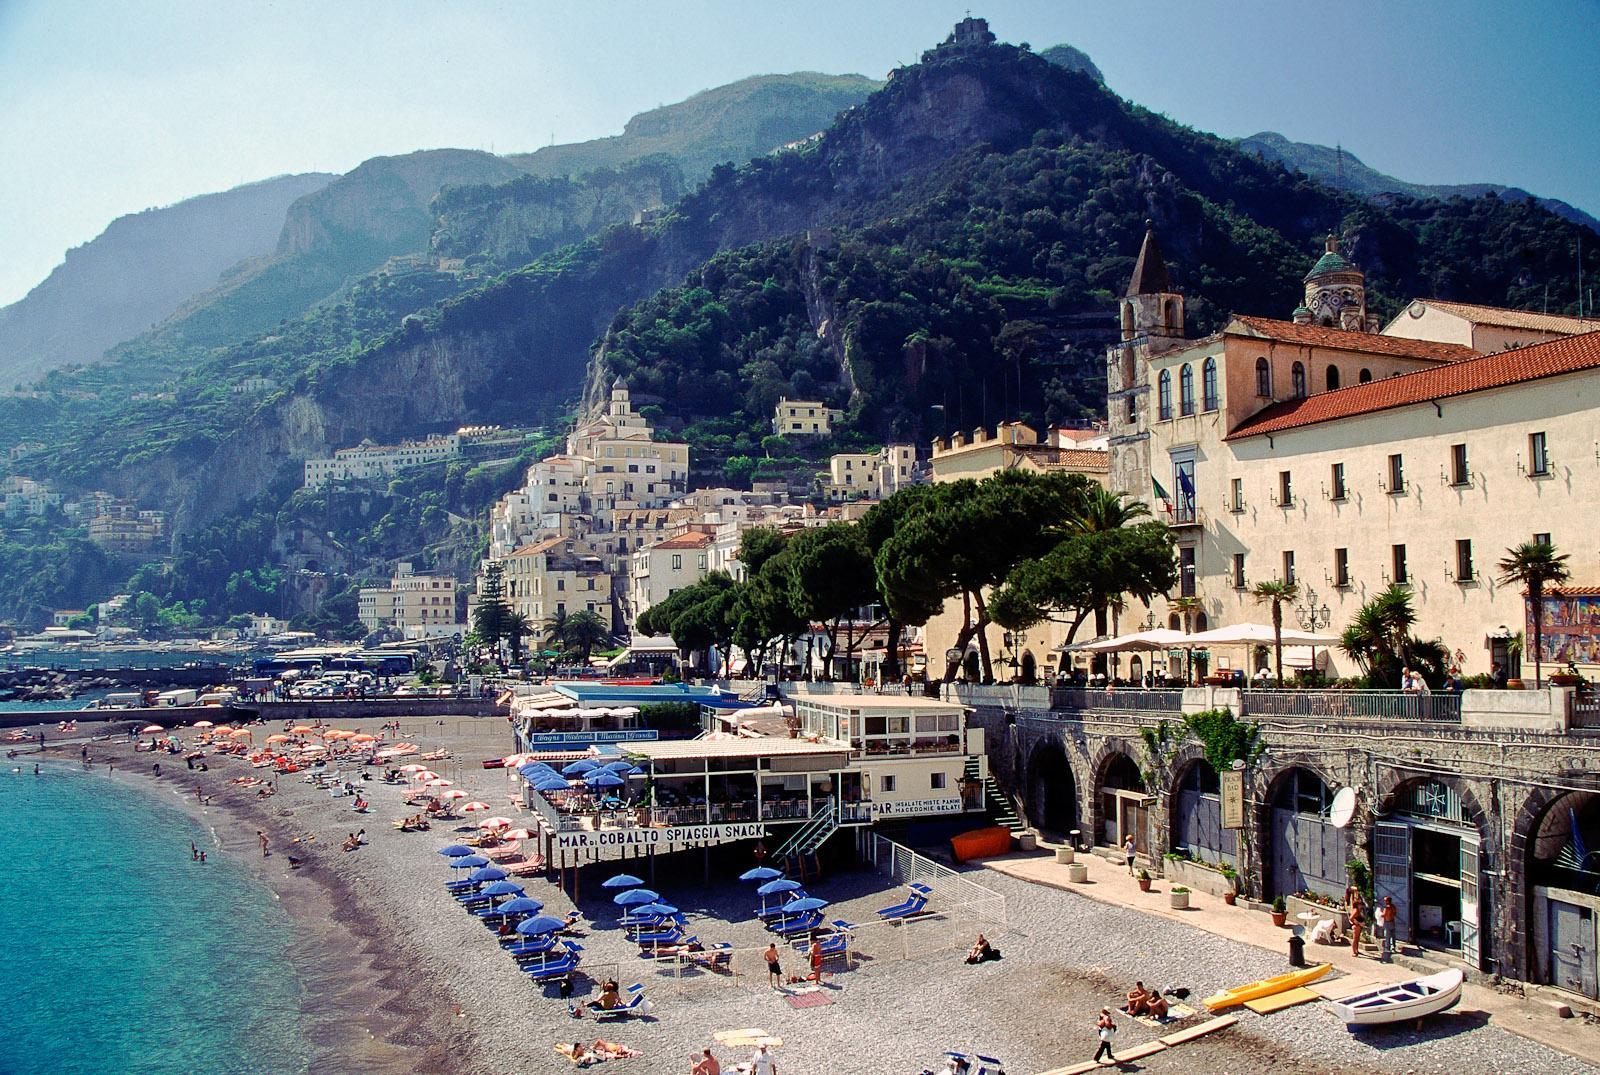 Top 10 things to do in the Amalfi Coast